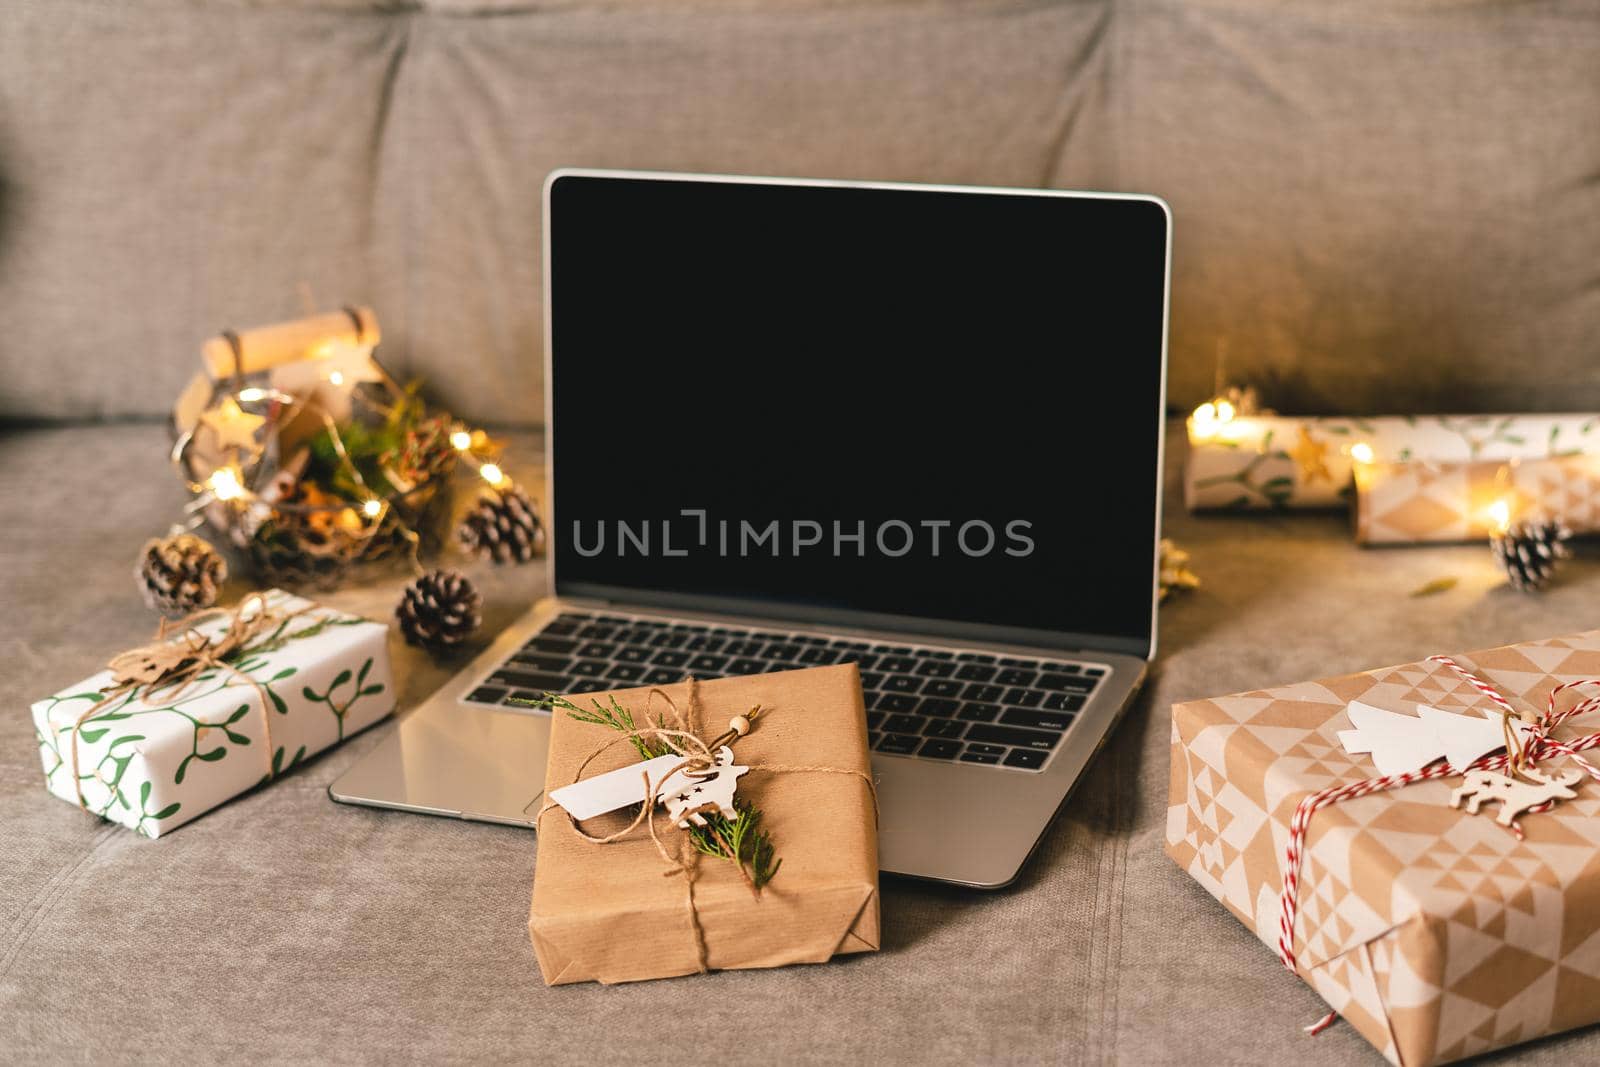 Online shopping at Christmas holidays. Gifts, and mock up screen laptop on couch with natural eco presents and decor. Merry Christmas. Wrapping present boxes